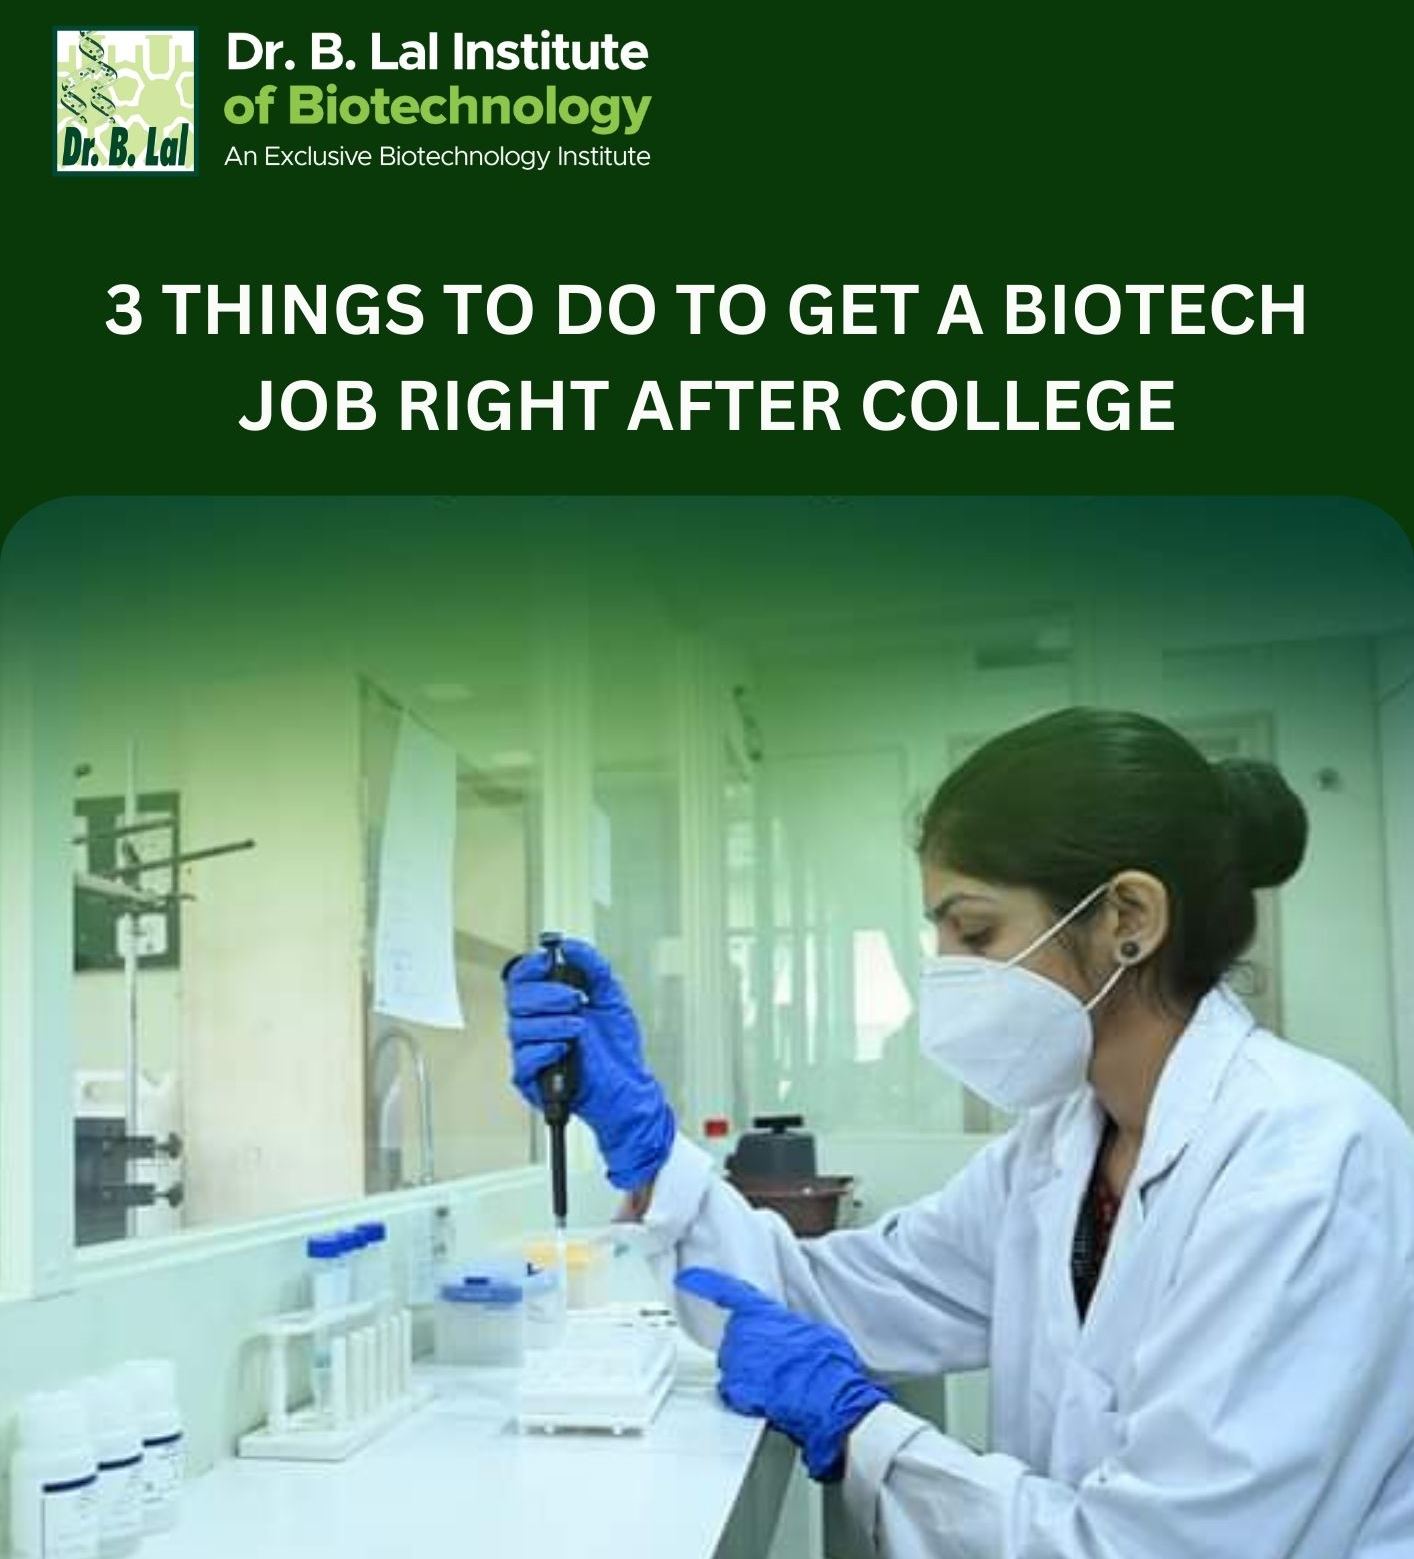 3 Things to do to get a Biotech Job right after college